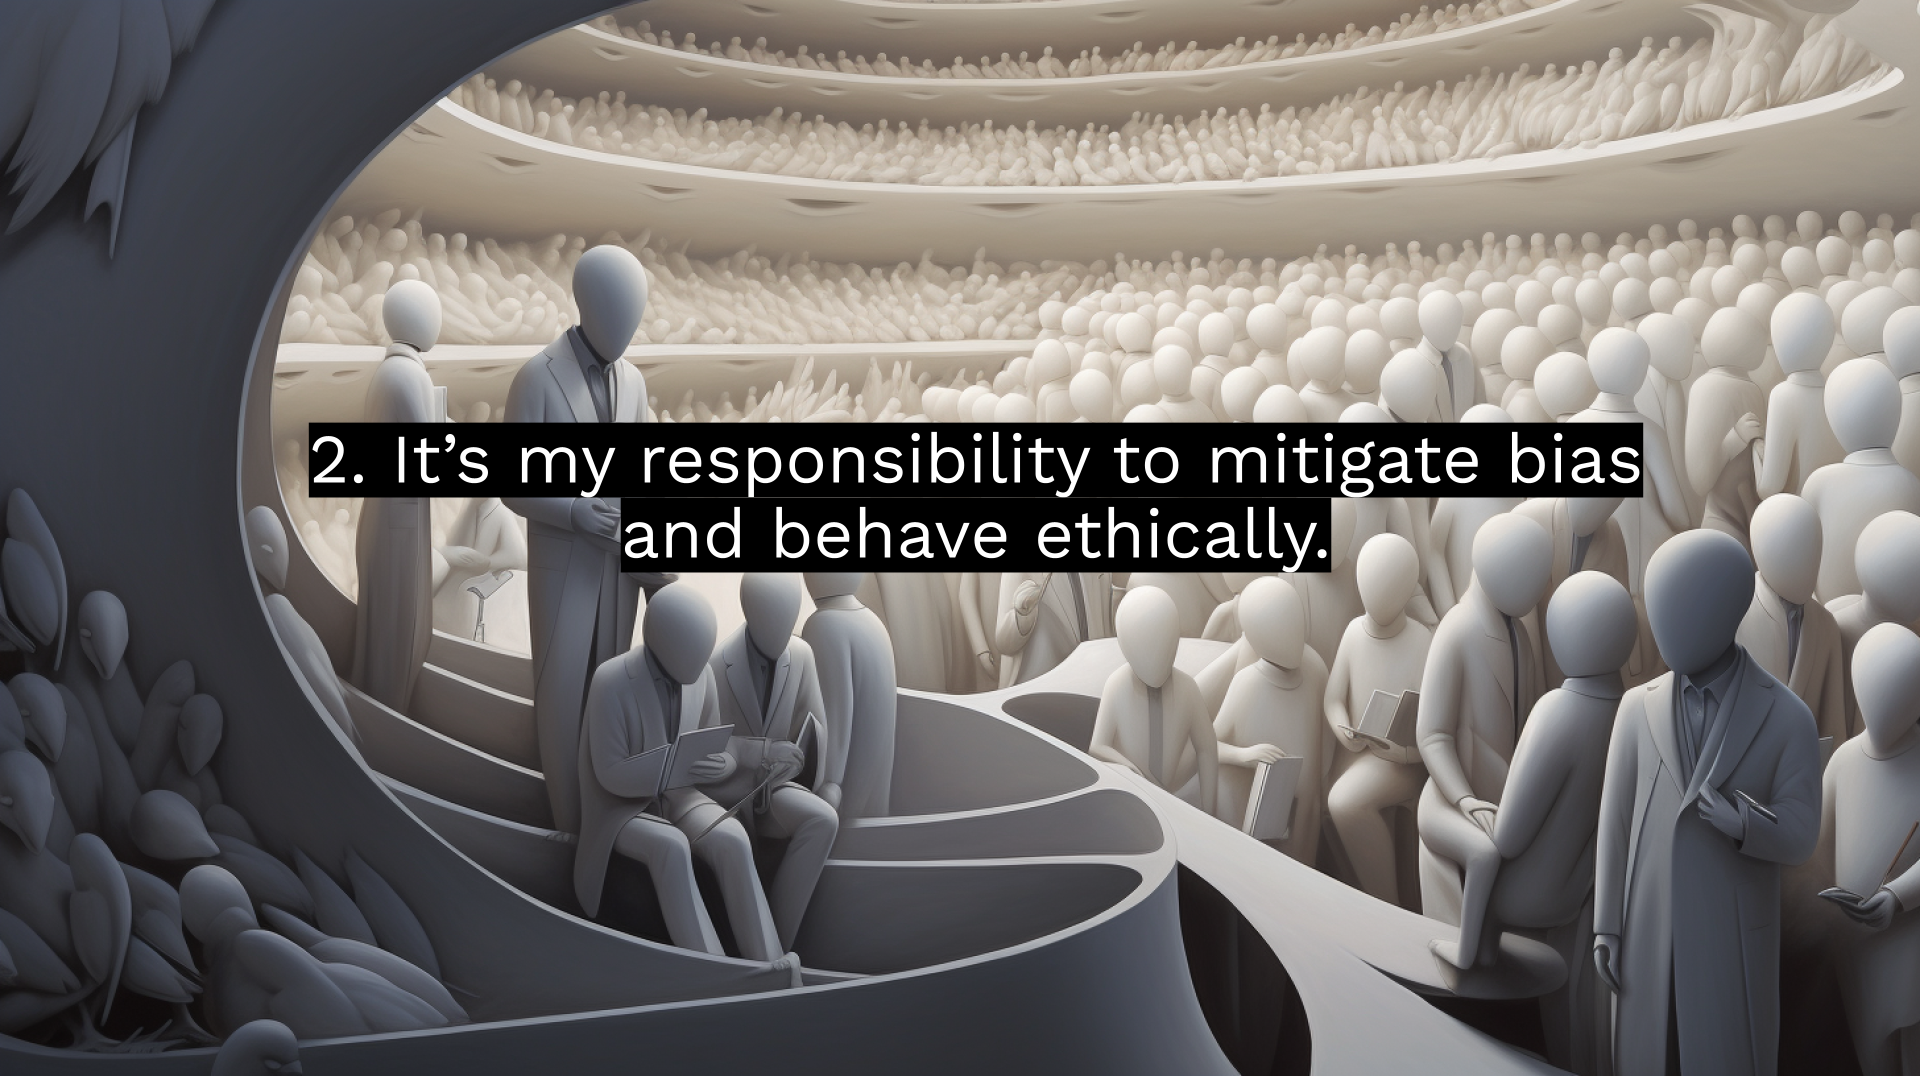 In human-AI collaboration, culture change is the responsibility of the humans. Image: Digital artwork of hundreds of faceless human figures conferring in a bureaucratic environment superimposed with the phrase: "It's my responsibility to mitigate bias and behave ethically." | August Public